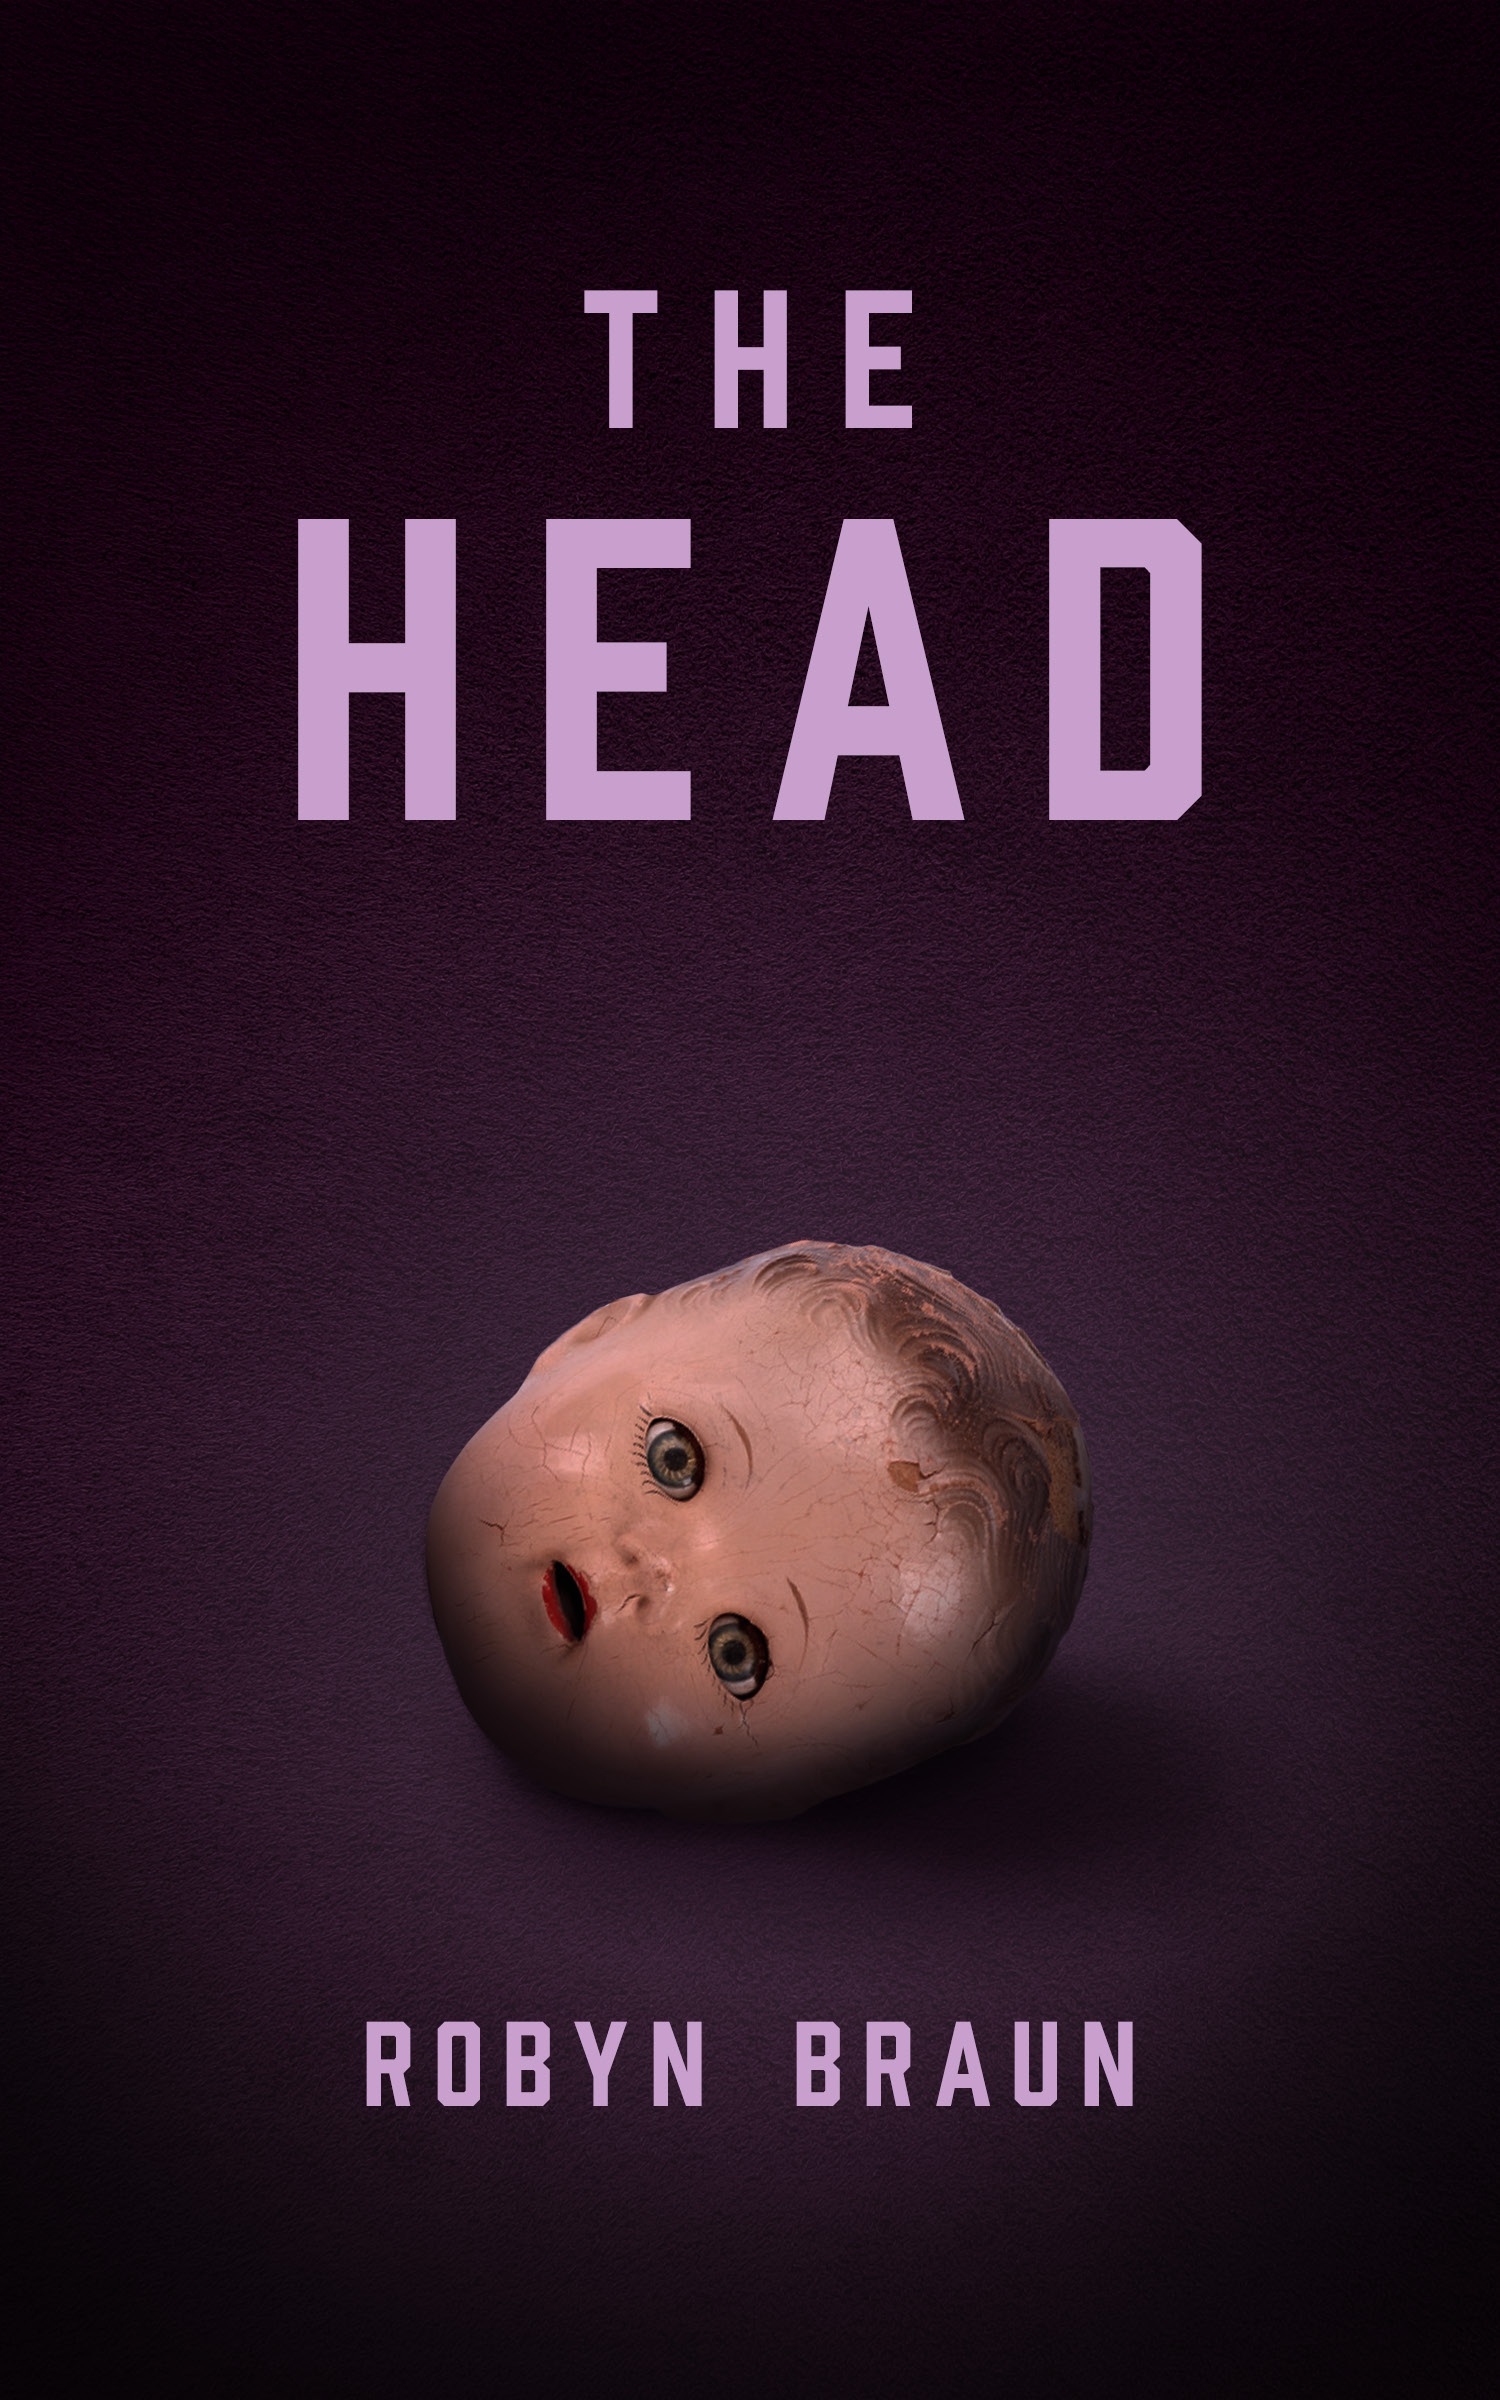 Book cover of "The Head"